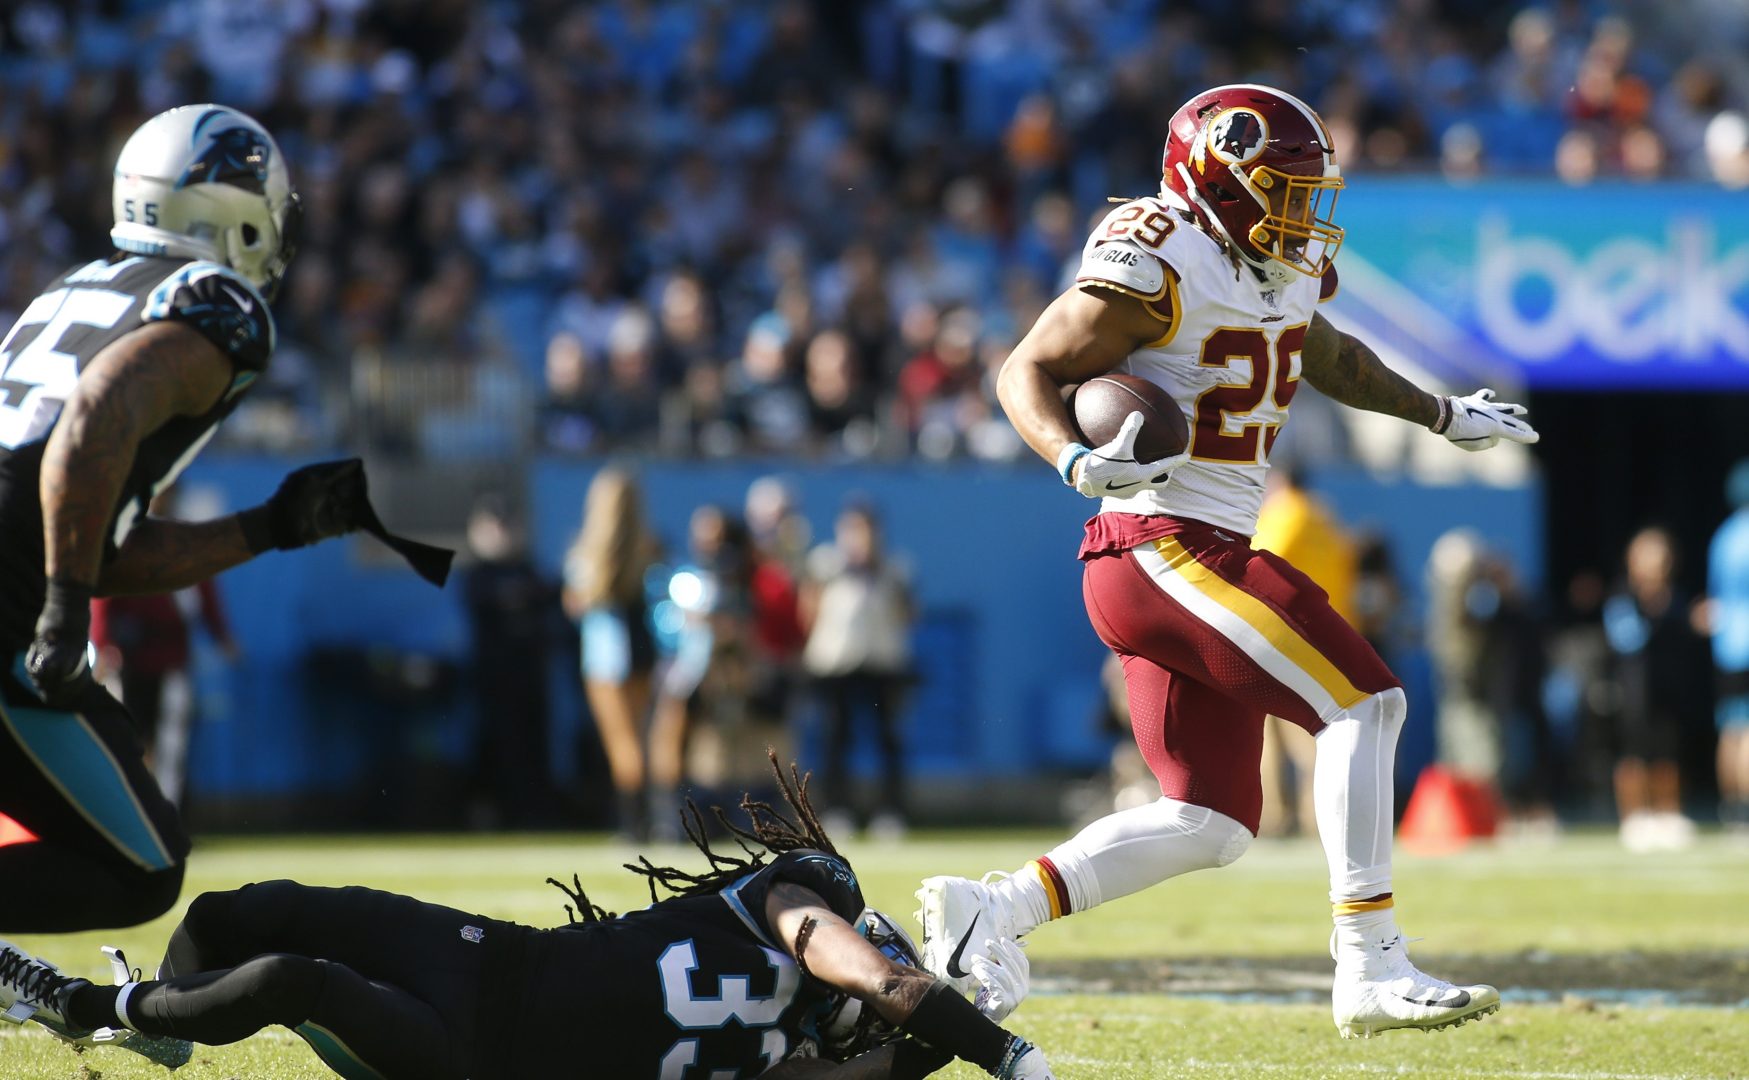 Washington Redskins running back Derrius Guice (29) runs the ball while Carolina Panthers free safety Tre Boston (33) dives to tackle during the first half of an NFL football game in Charlotte, N.C., Sunday, Dec. 1, 2019. 